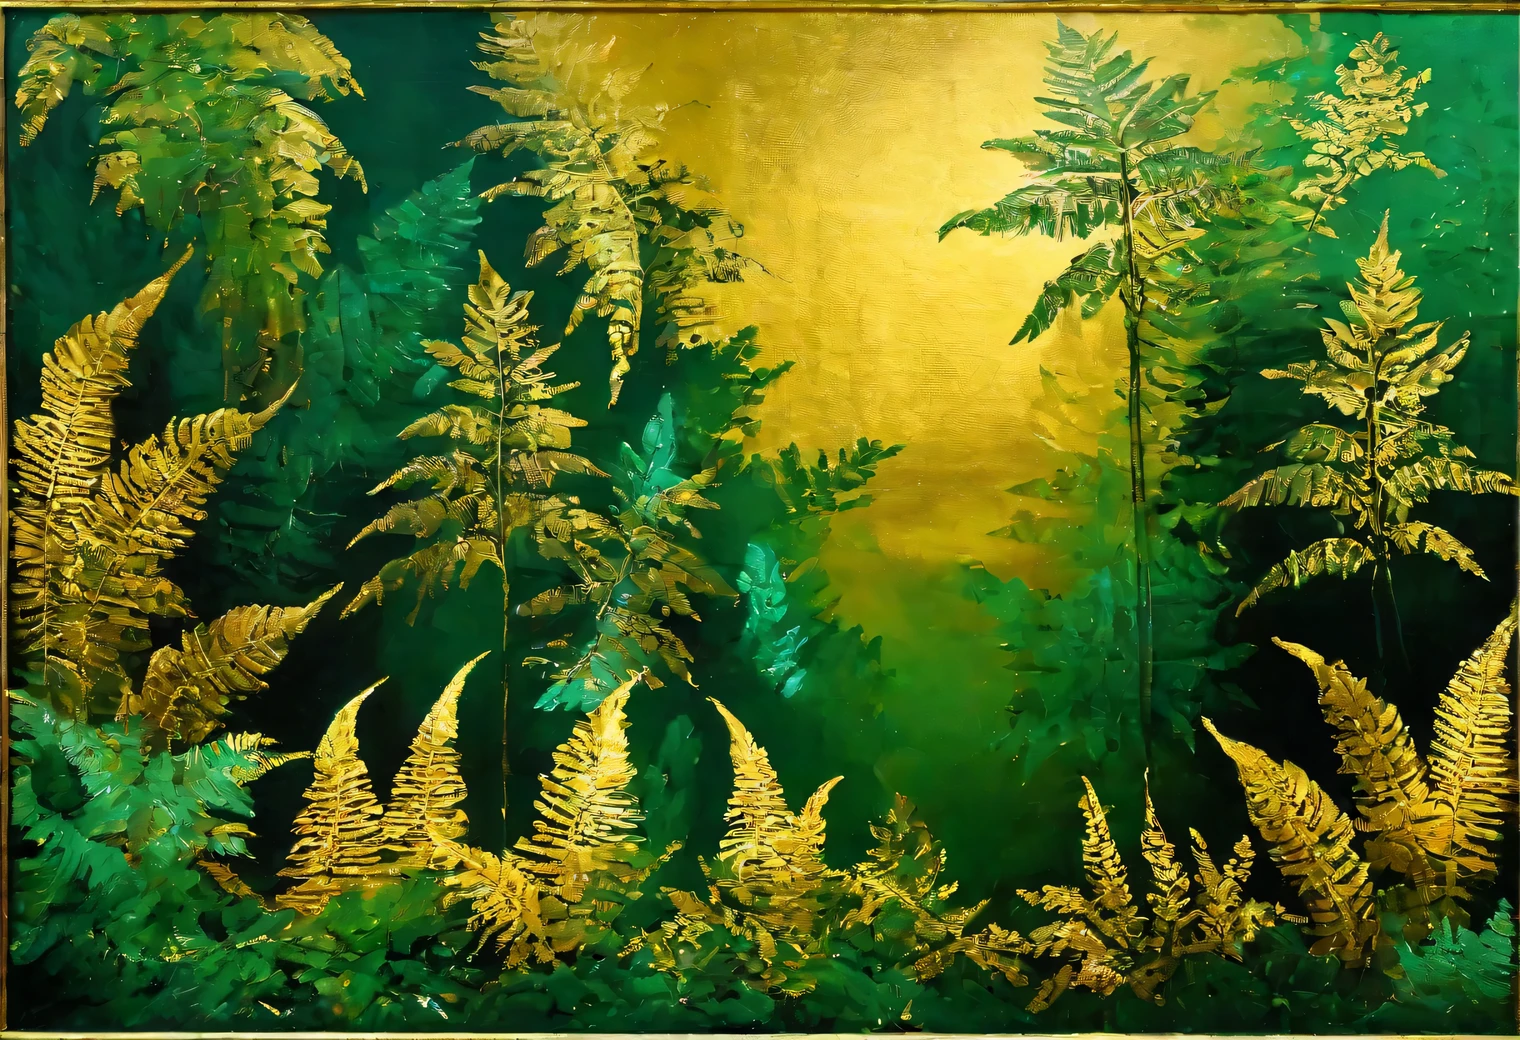 Forest theme, ferns and trees, gold leaf on a green background, high definition, gold leaf painting